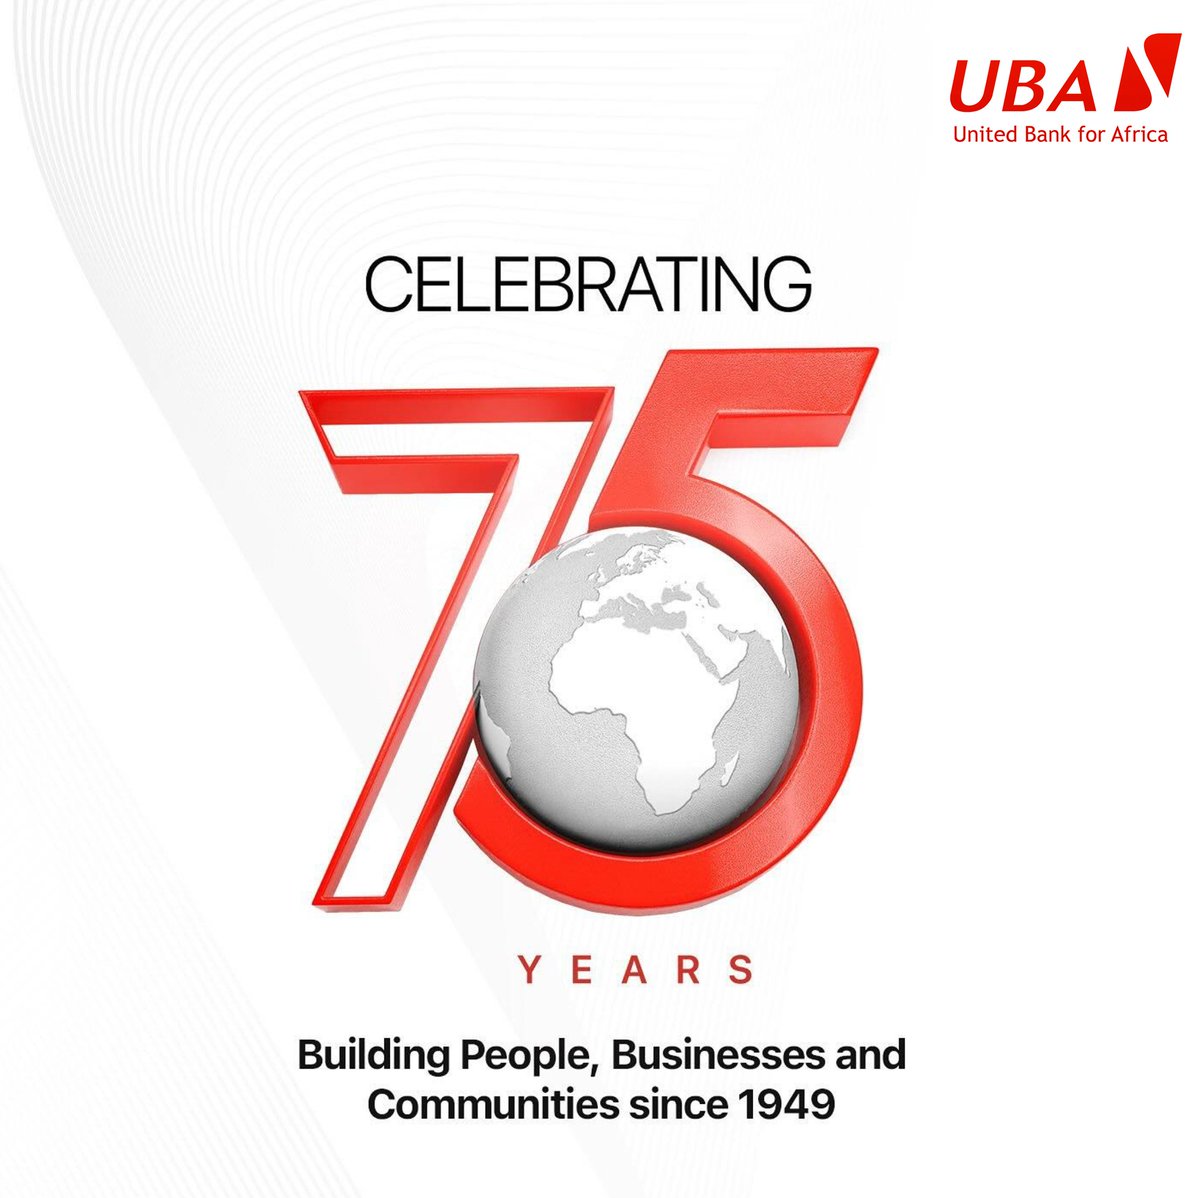 Today marks a significant milestone as UBA celebrates 75 years of serving Africa. We extend our deepest gratitude to our esteemed customers whose unwavering trust has propelled us forward. As we commemorate this journey, we renew our commitment to fostering growth and prosperity